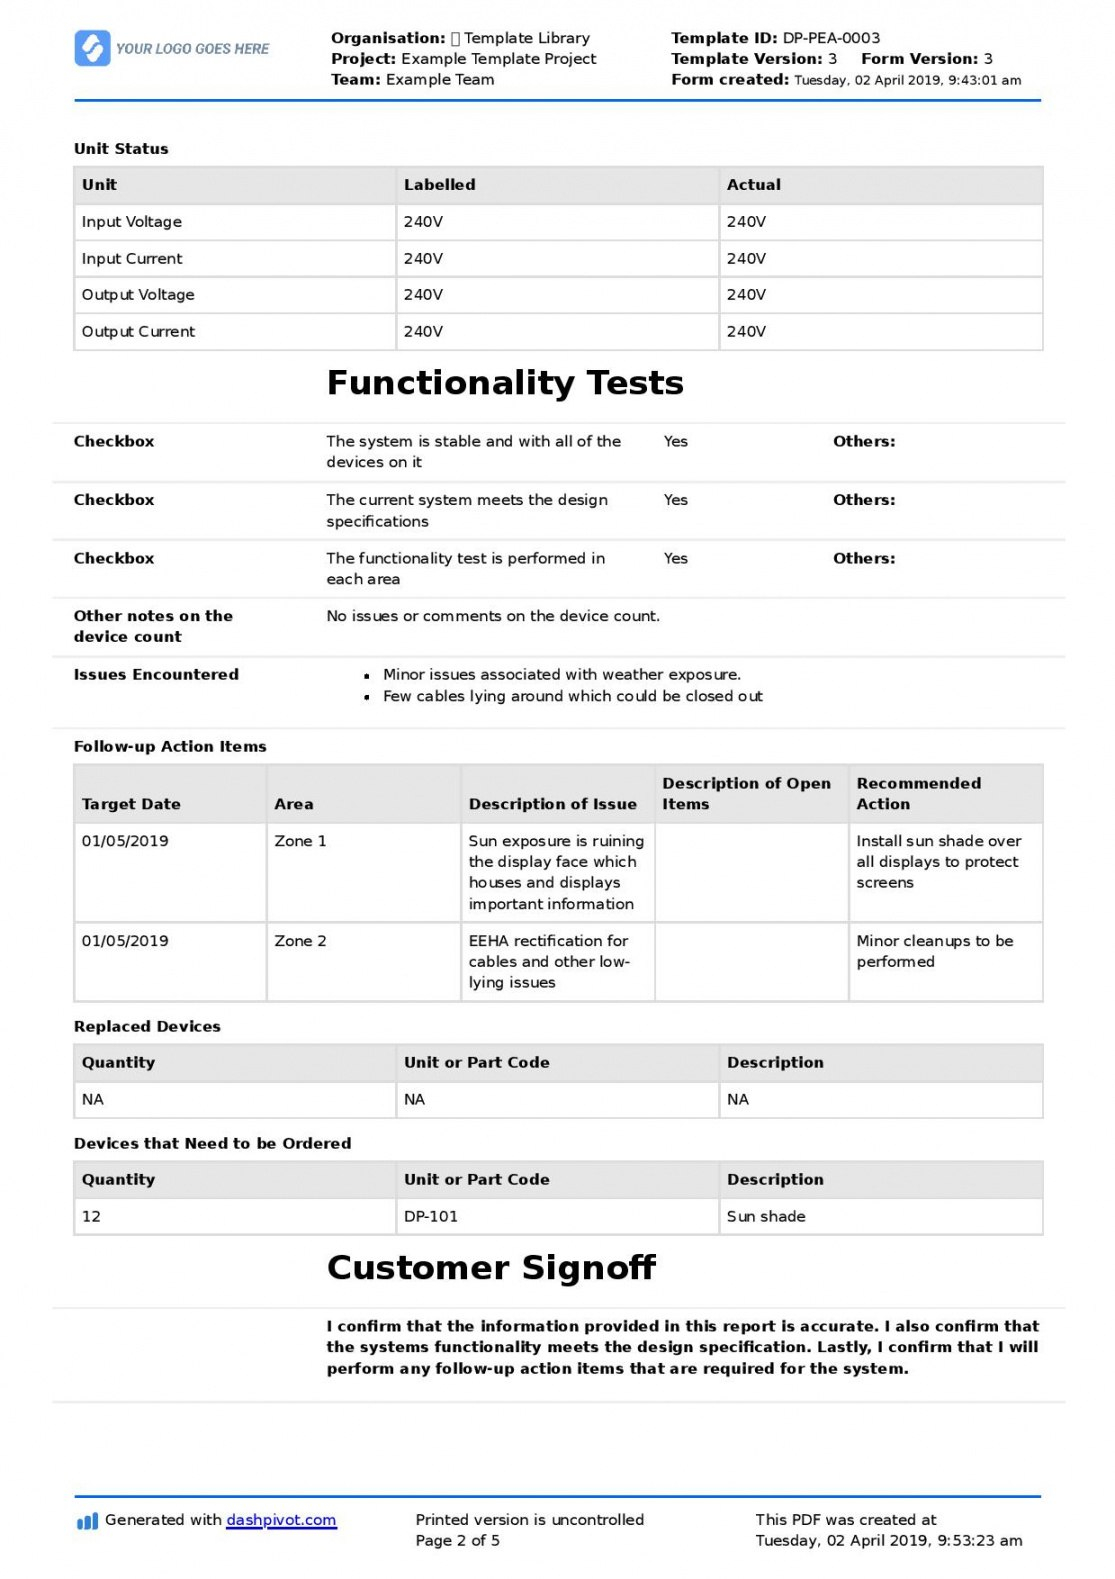 Technical Service Report Template intended for Technical Service Report Template